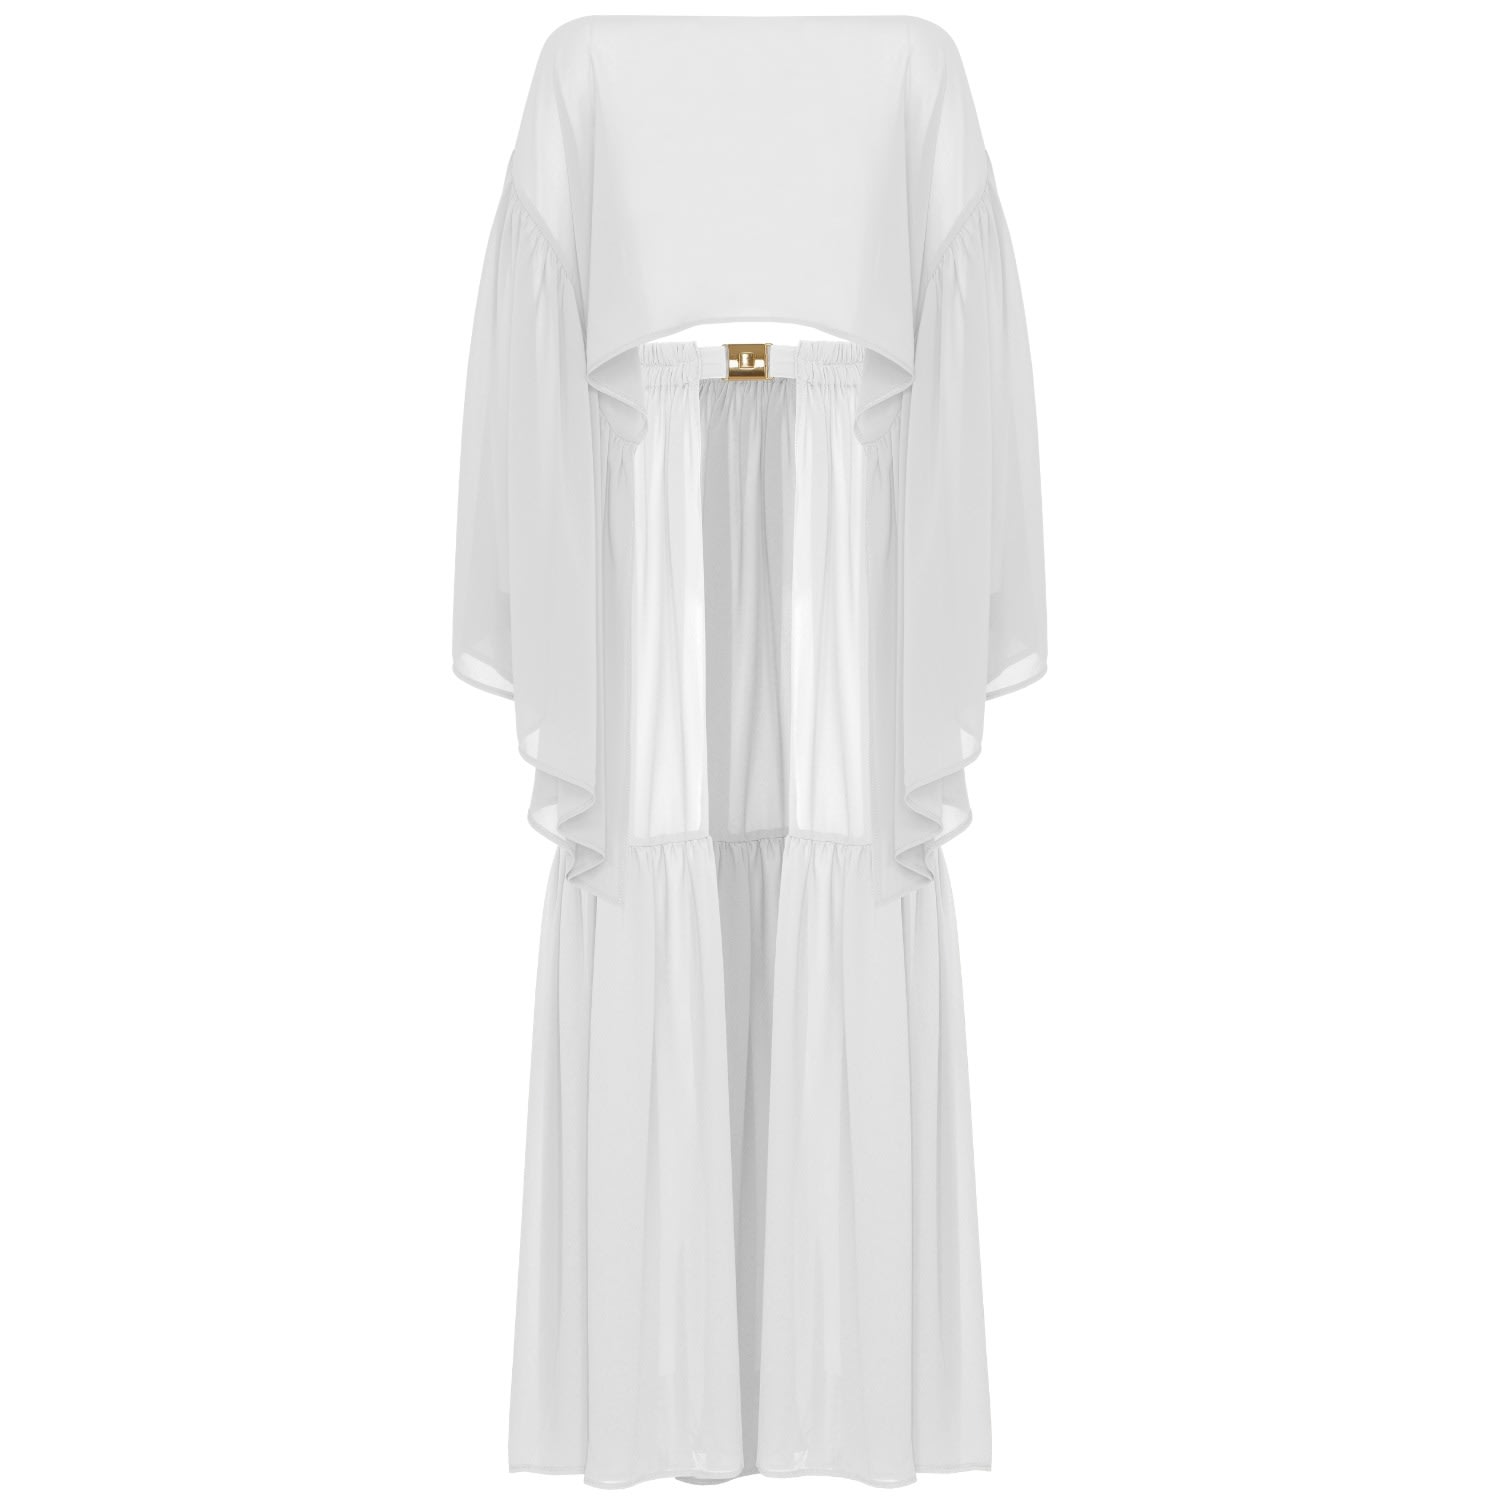 Women's Comely Beach Cover-Up In White Xs/S ANTONINIAS